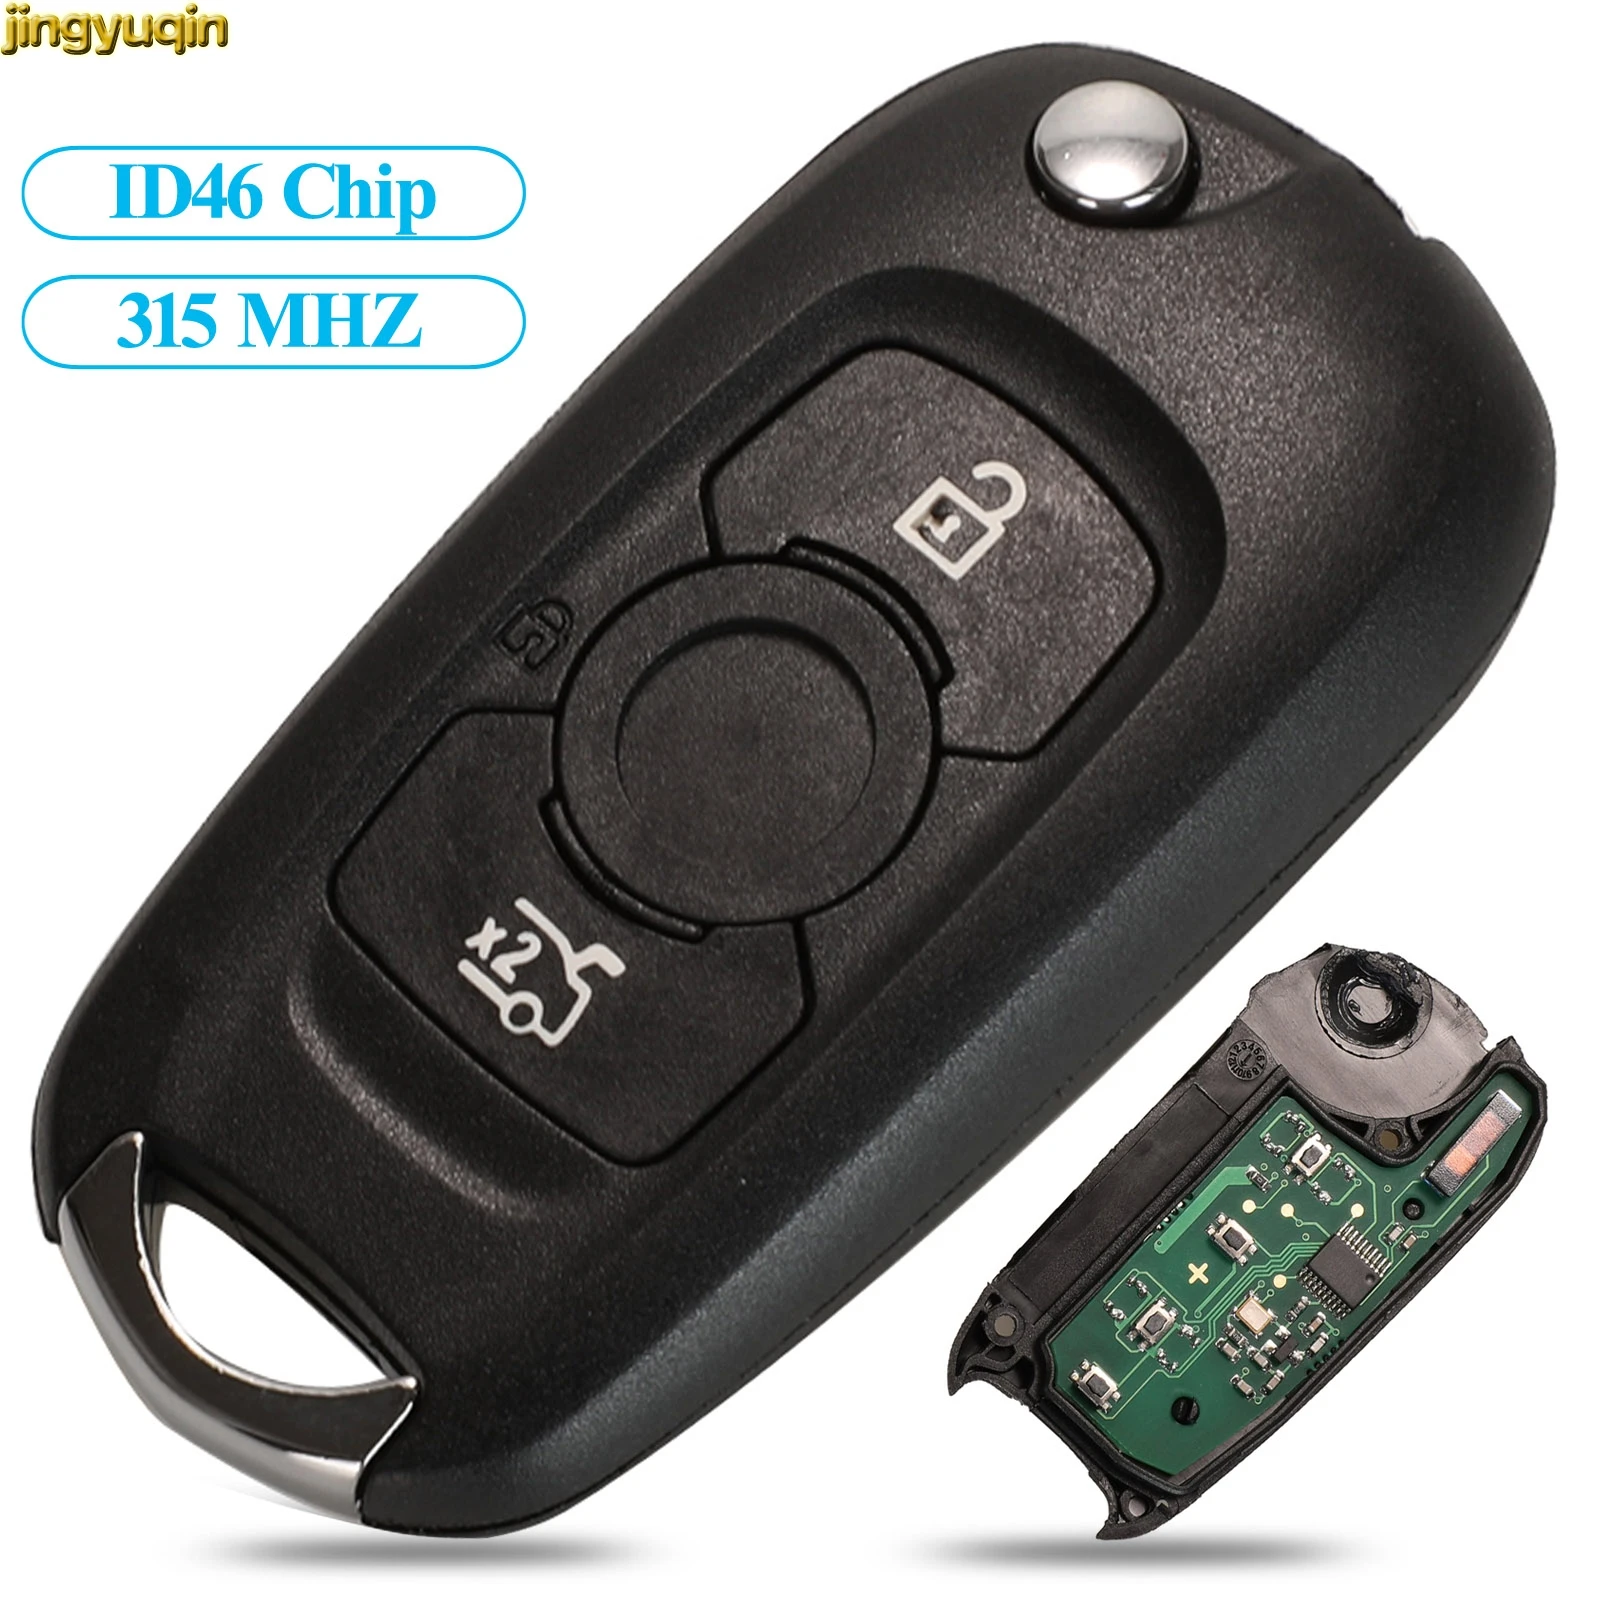 

Jingyuqin Flip Remote Car Key Control 315MHz ID46 Chip For Buick Verano after 2015 Regal GT/Excelle XT LaCROSSE Fob 3 Button